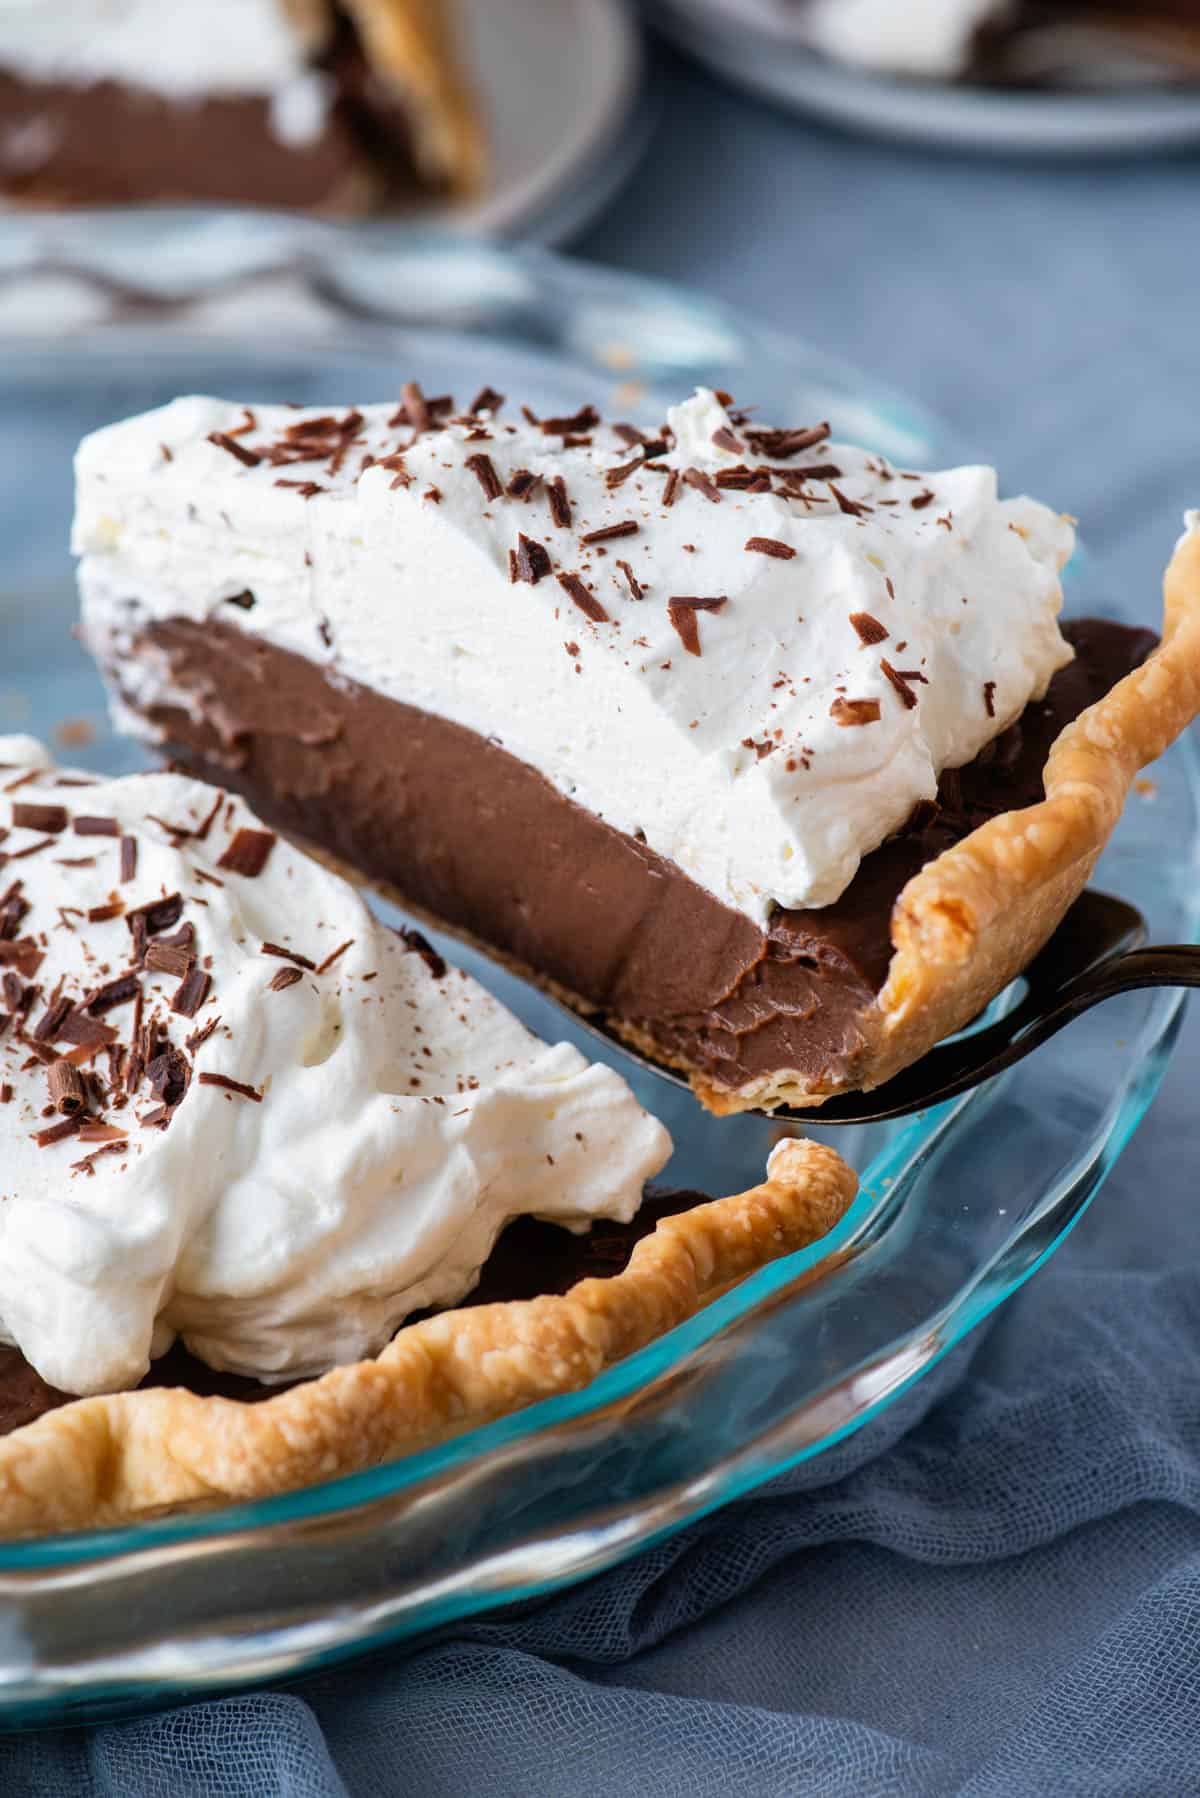 a slice of chocolate pie being lifted out of a glass pie dish sitting on top of a blue towel with more pie slices on plates in the background